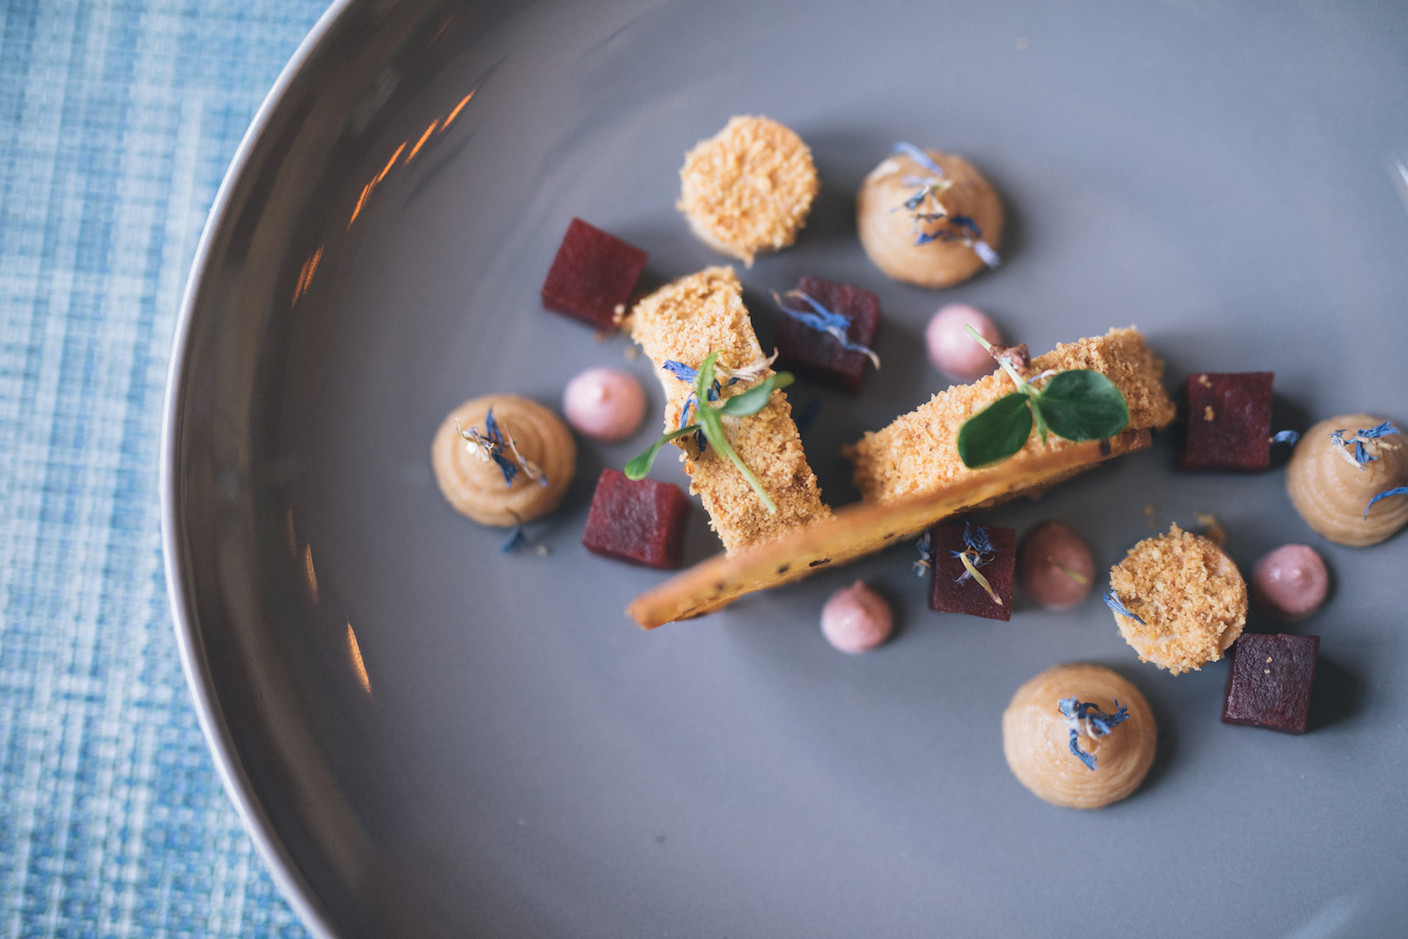 The chef has created a well-balanced menu in which the products are given pride of place and the dishes are particularly well prepared. Maison Moderne